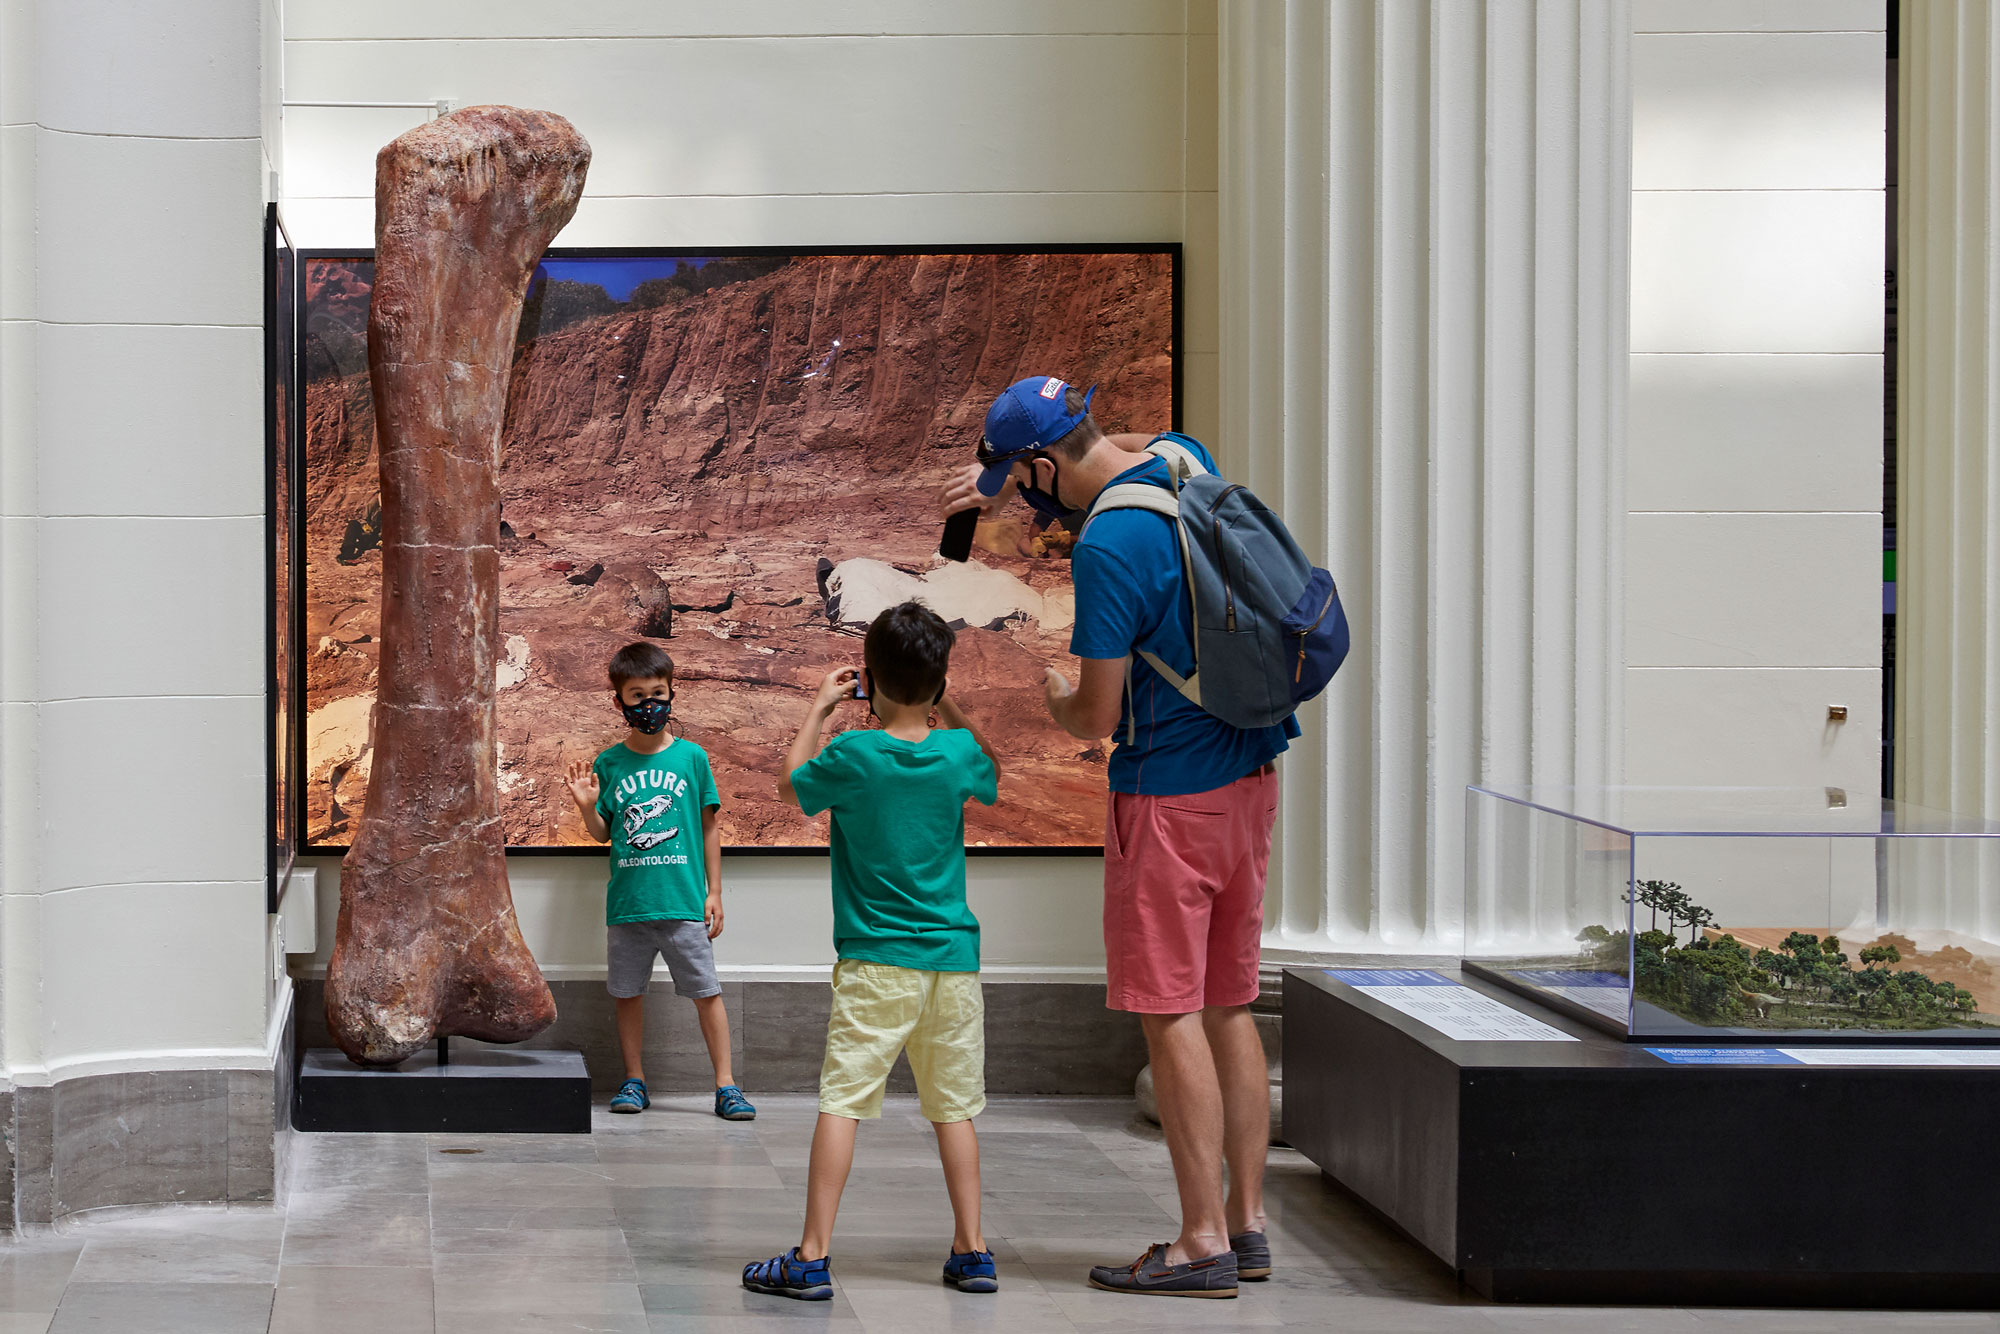 A young boy wearing a face mask poses for a photo next to a dinosaur bone that's twice his height, in front of a mural of a rocky landscape. Another young boy and a man take his photo.